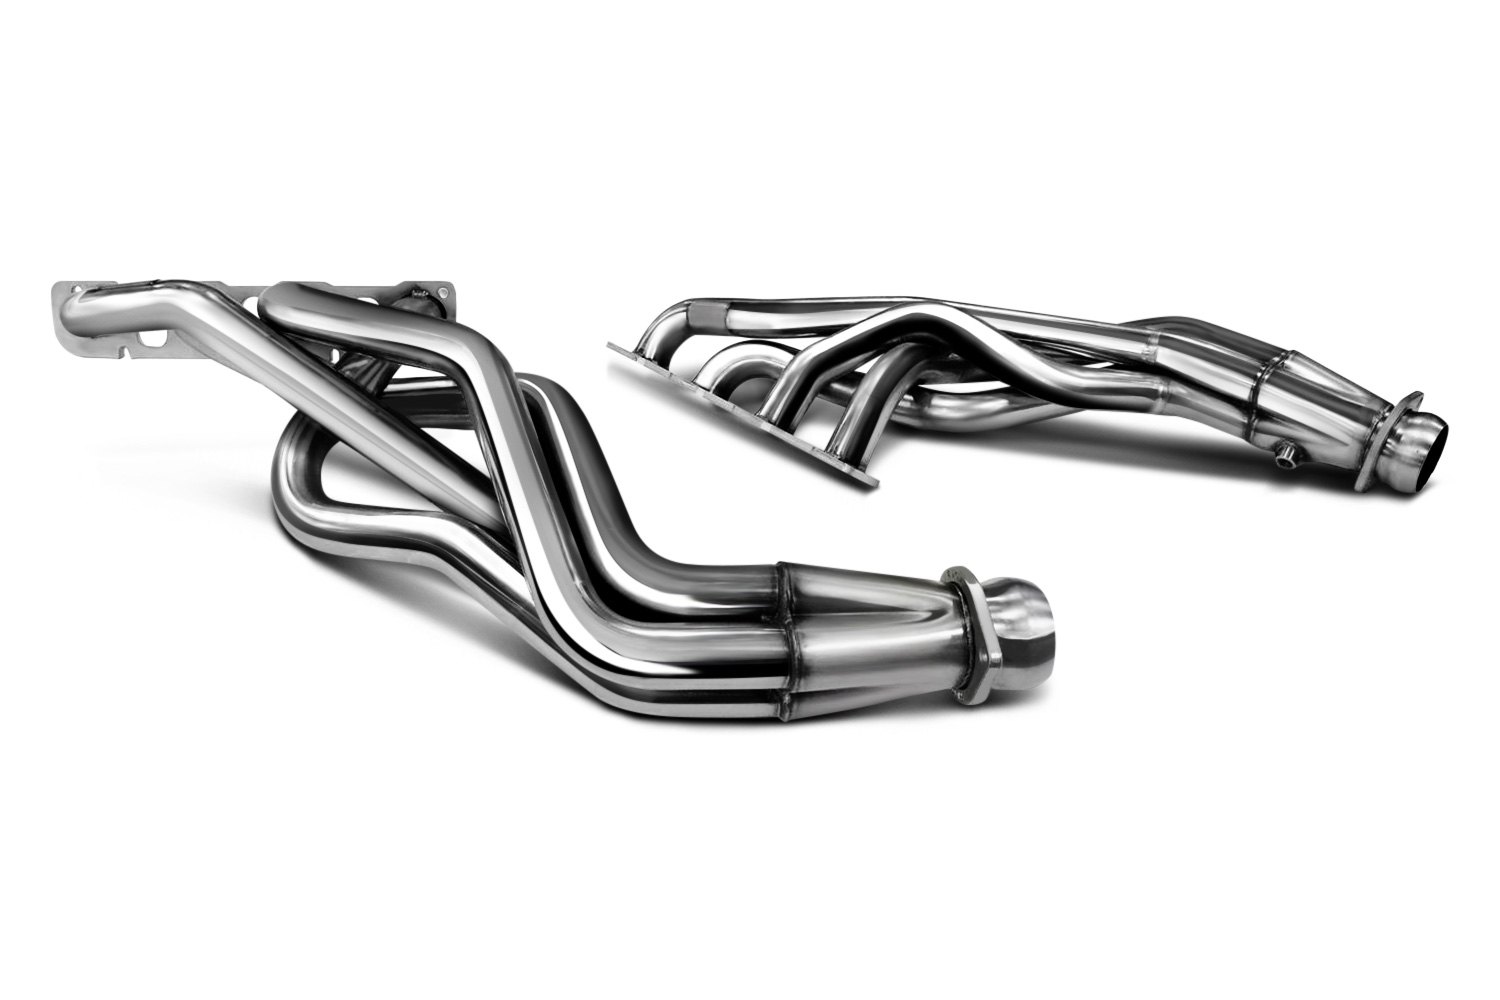 Tuning systems. Supersprint Exhaust r170. 2gr FKS Exhaust. Exhaust System 84500. Tenera 700 Exhaust.